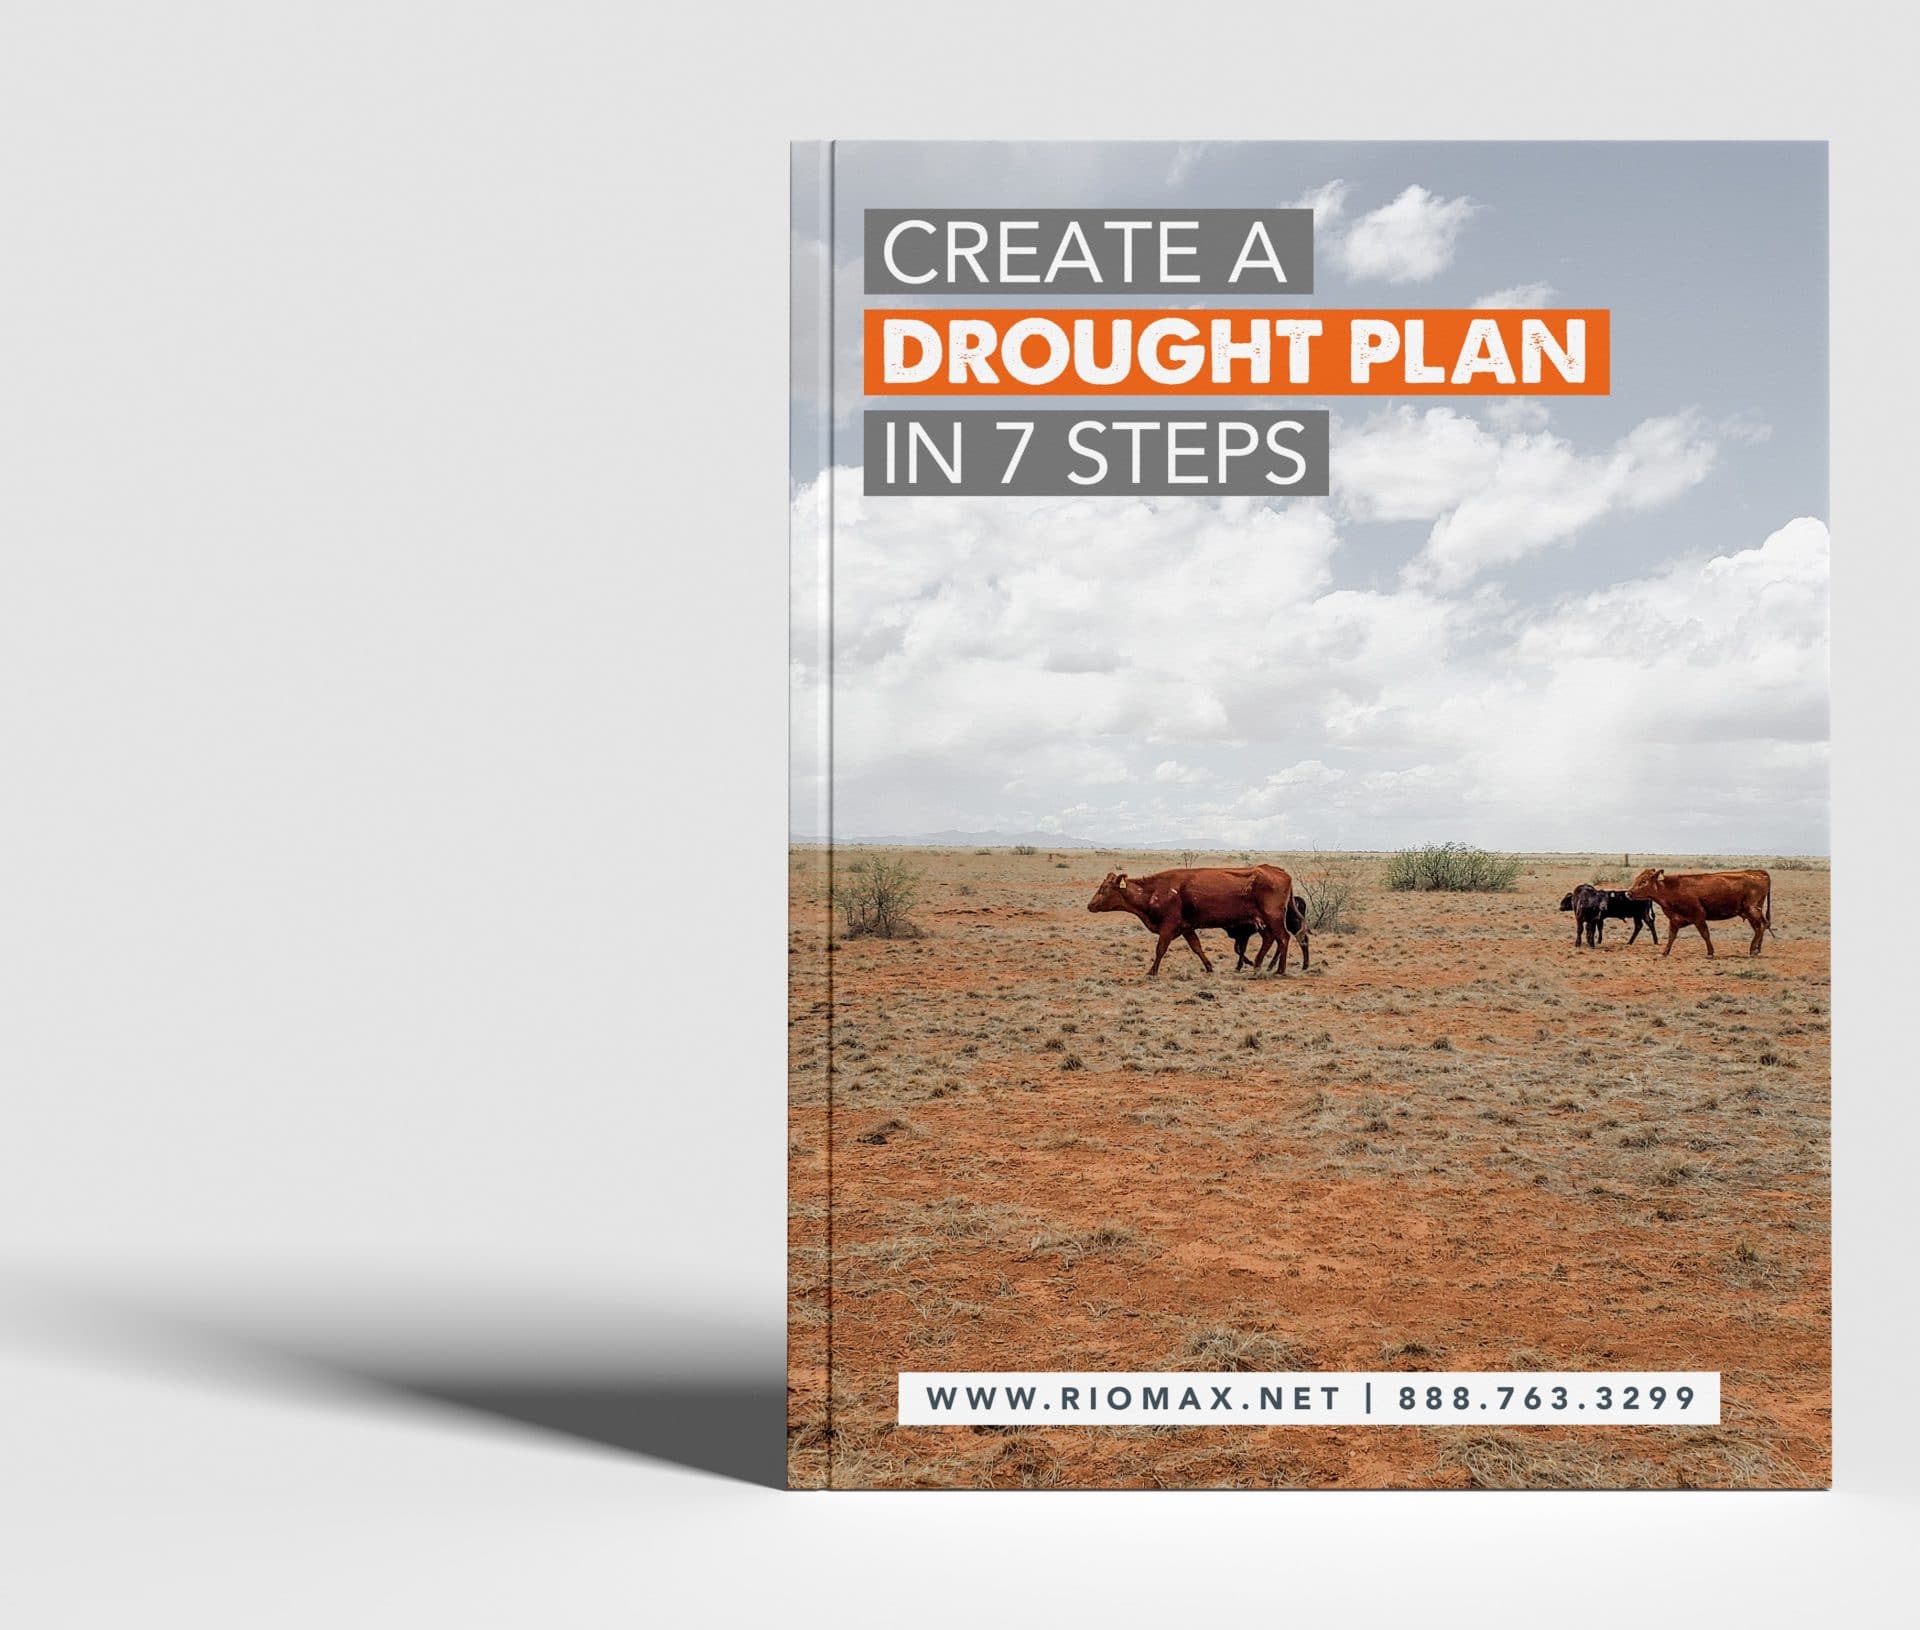 Create_A_Drought_Plan_in_7_Steps_Mockup.CROPPEDjpg